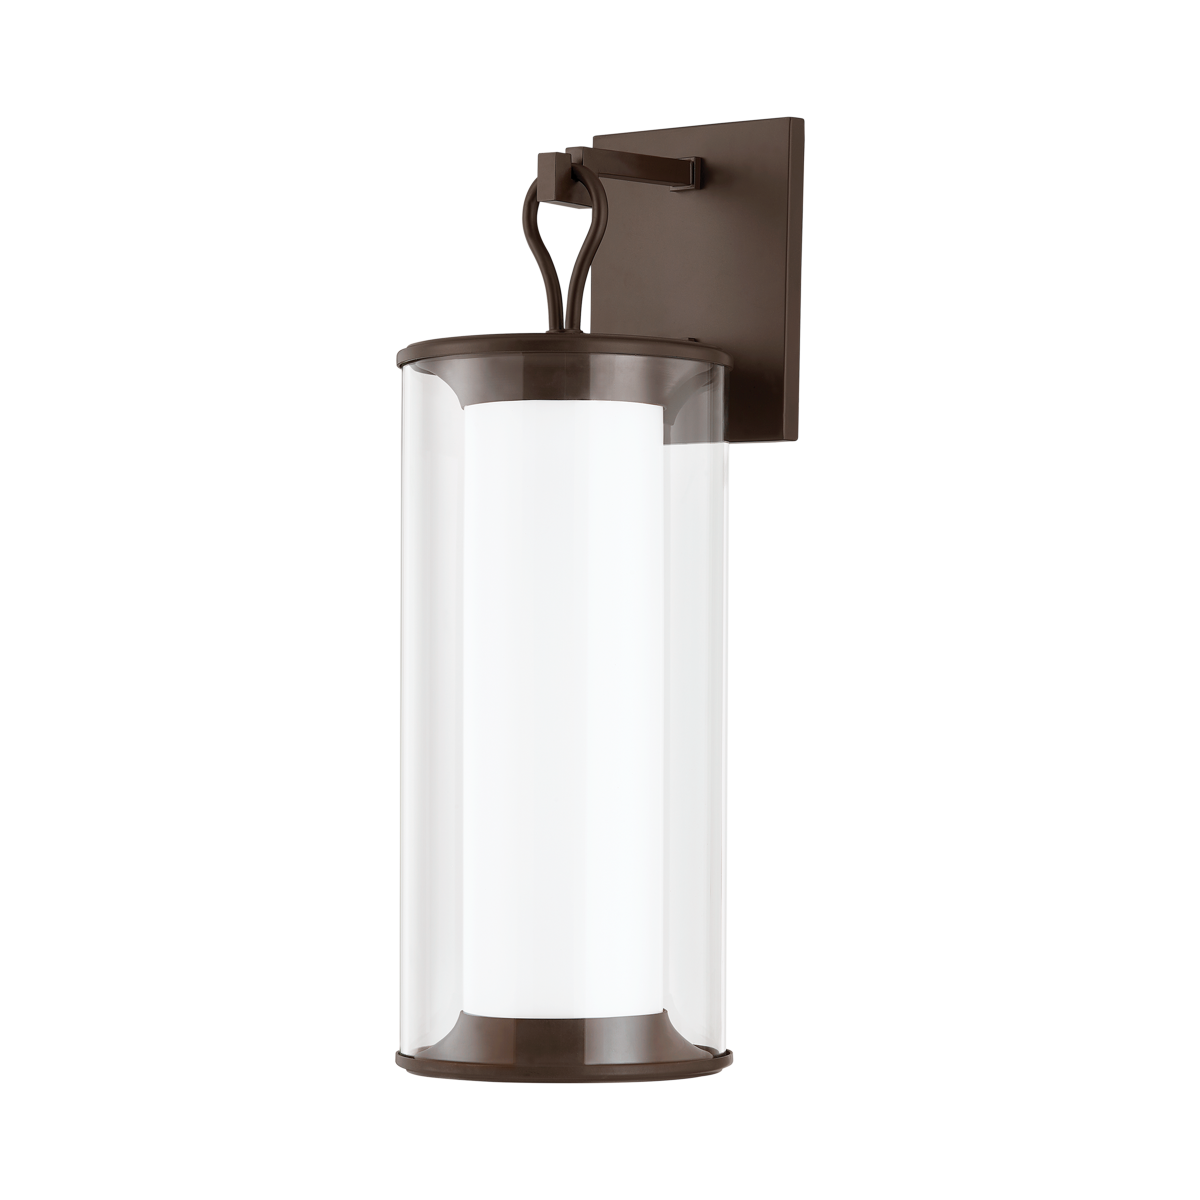 Troy Lighting CANNES Exterior Wall Sconce